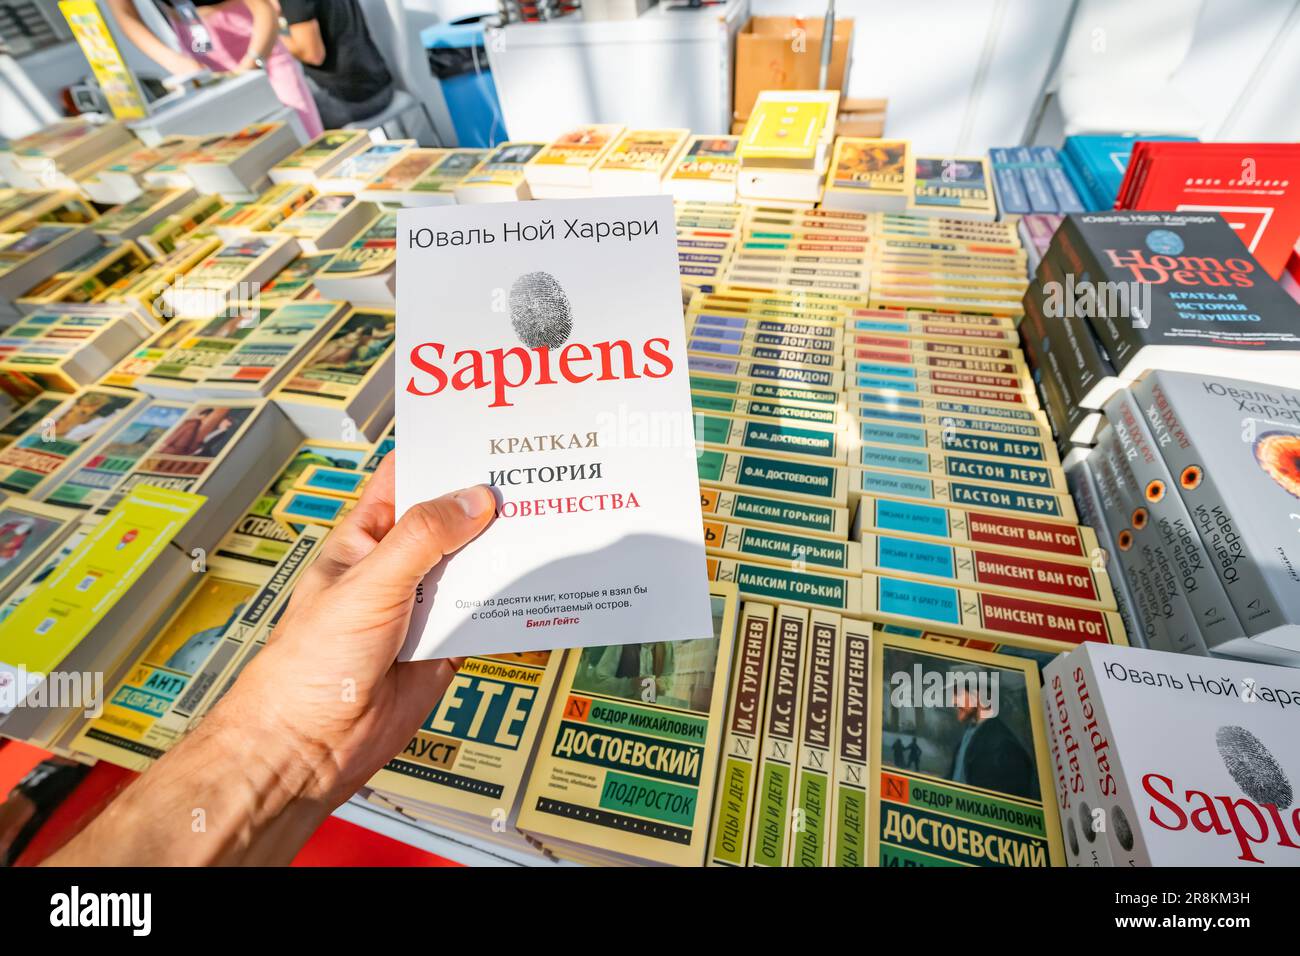 28 October 2022: Antalya, Turkey: Sapiens Harari in russian books at fair and festival. Literature sale and education concept Stock Photo